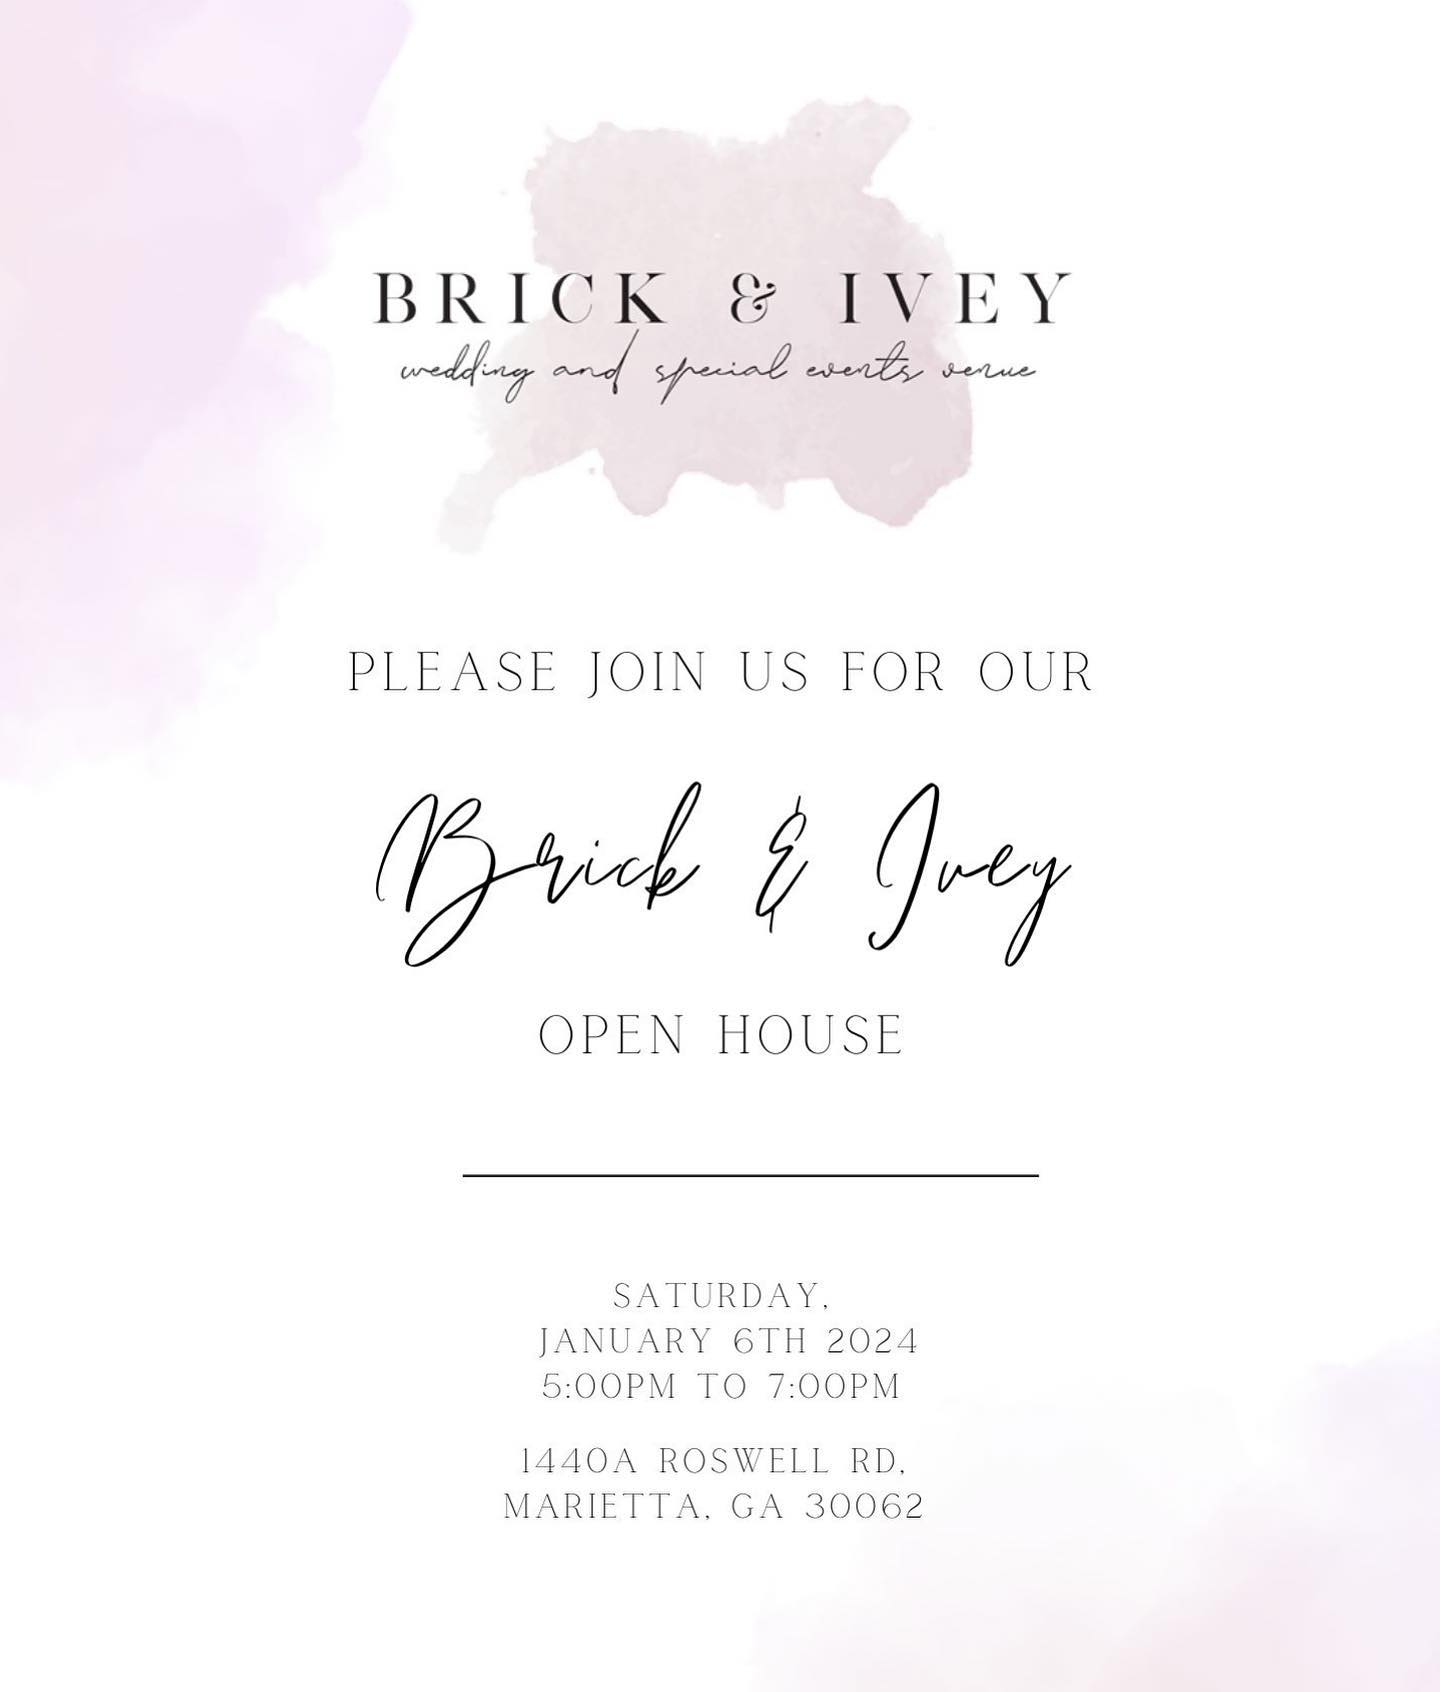 Image for post: Brick & Ivey Open House - January 2024